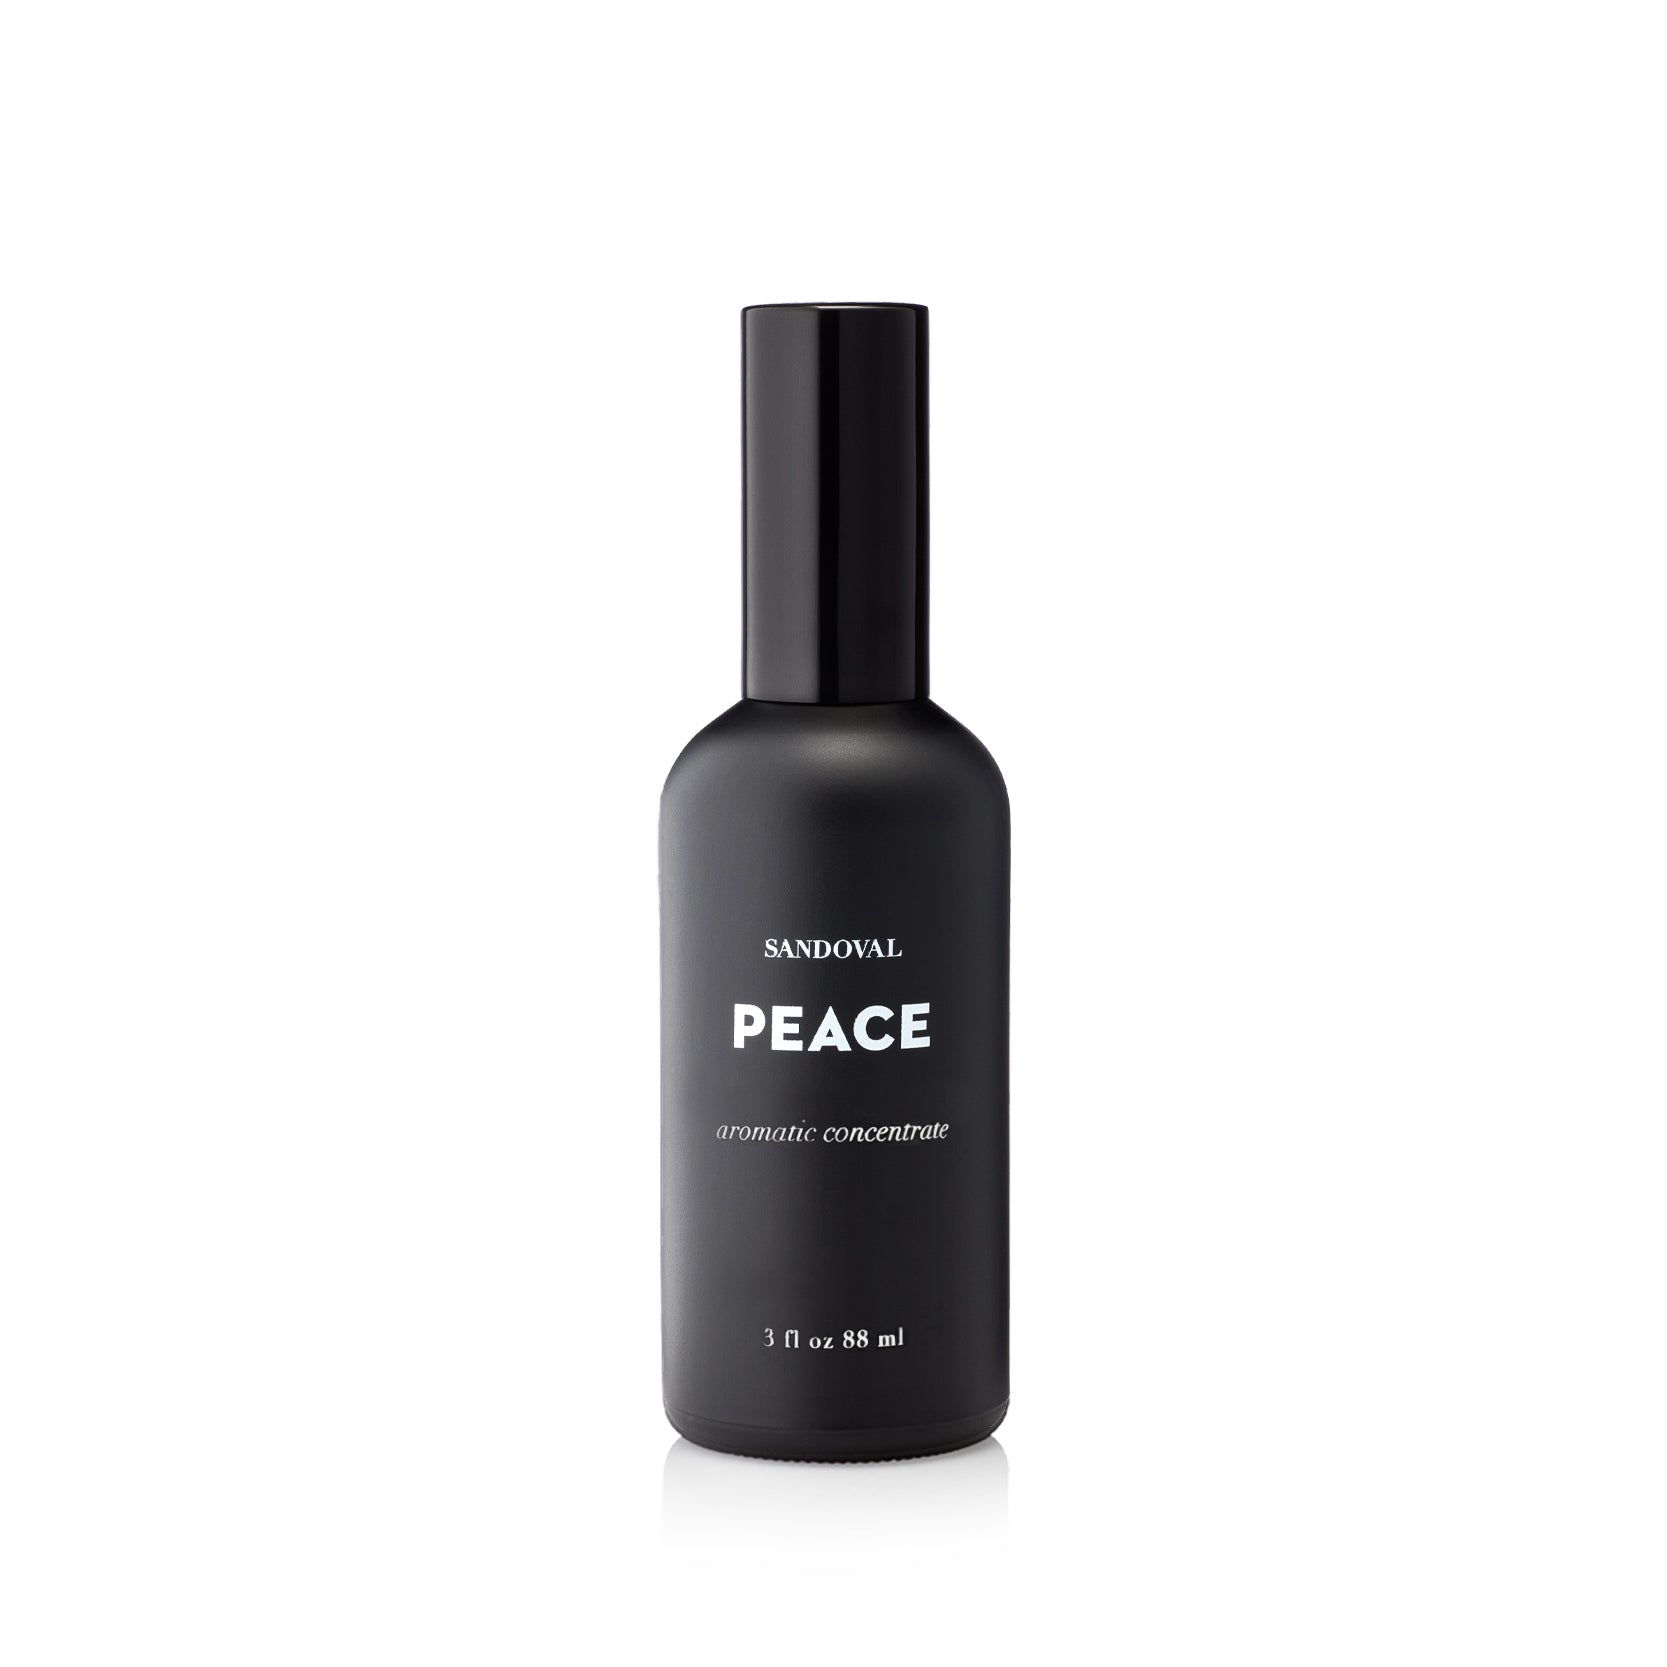 peace aromatic concentrate spray. personal fragrance,natural aromatherapy spray, linen spray, air freshener essential oil blend of patchouli essential oil, sandalwood essential oil, frankincense essential oil, palo santo essential oil. Housed in a black glass 3 ounce bottle with a fine atomizer spray cap. made in california. california fragrance